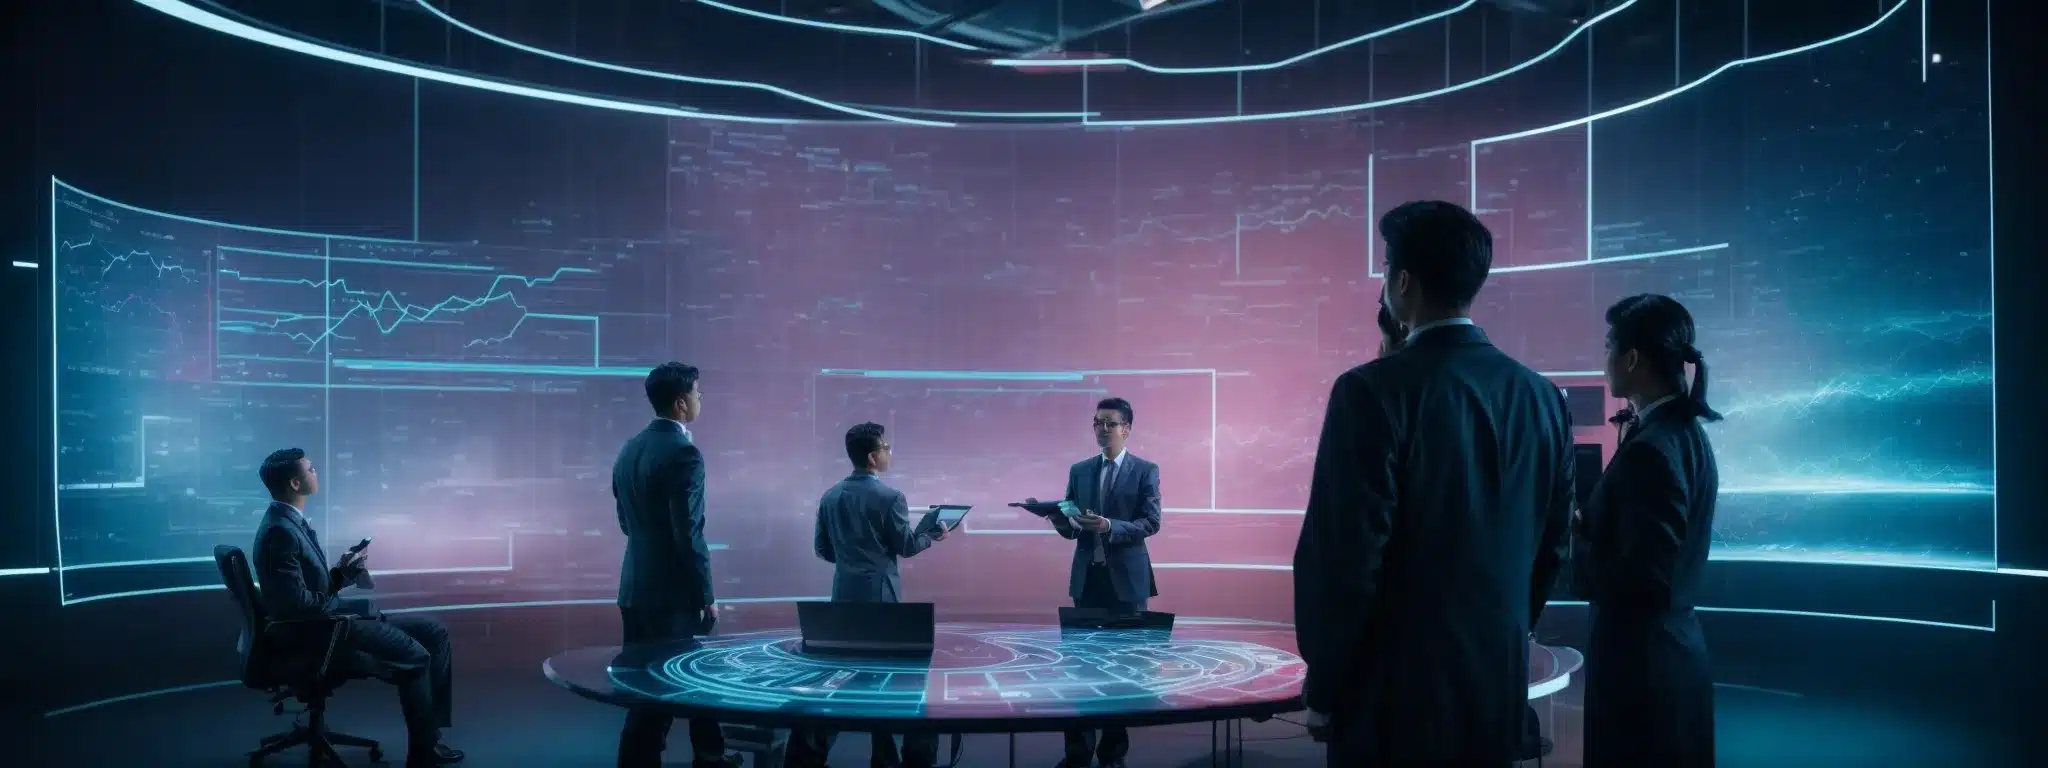 A Group Of Professionals Gathered Around A Futuristic Holographic Display, Strategizing Over Dynamic, Digital Graphs And Charts.